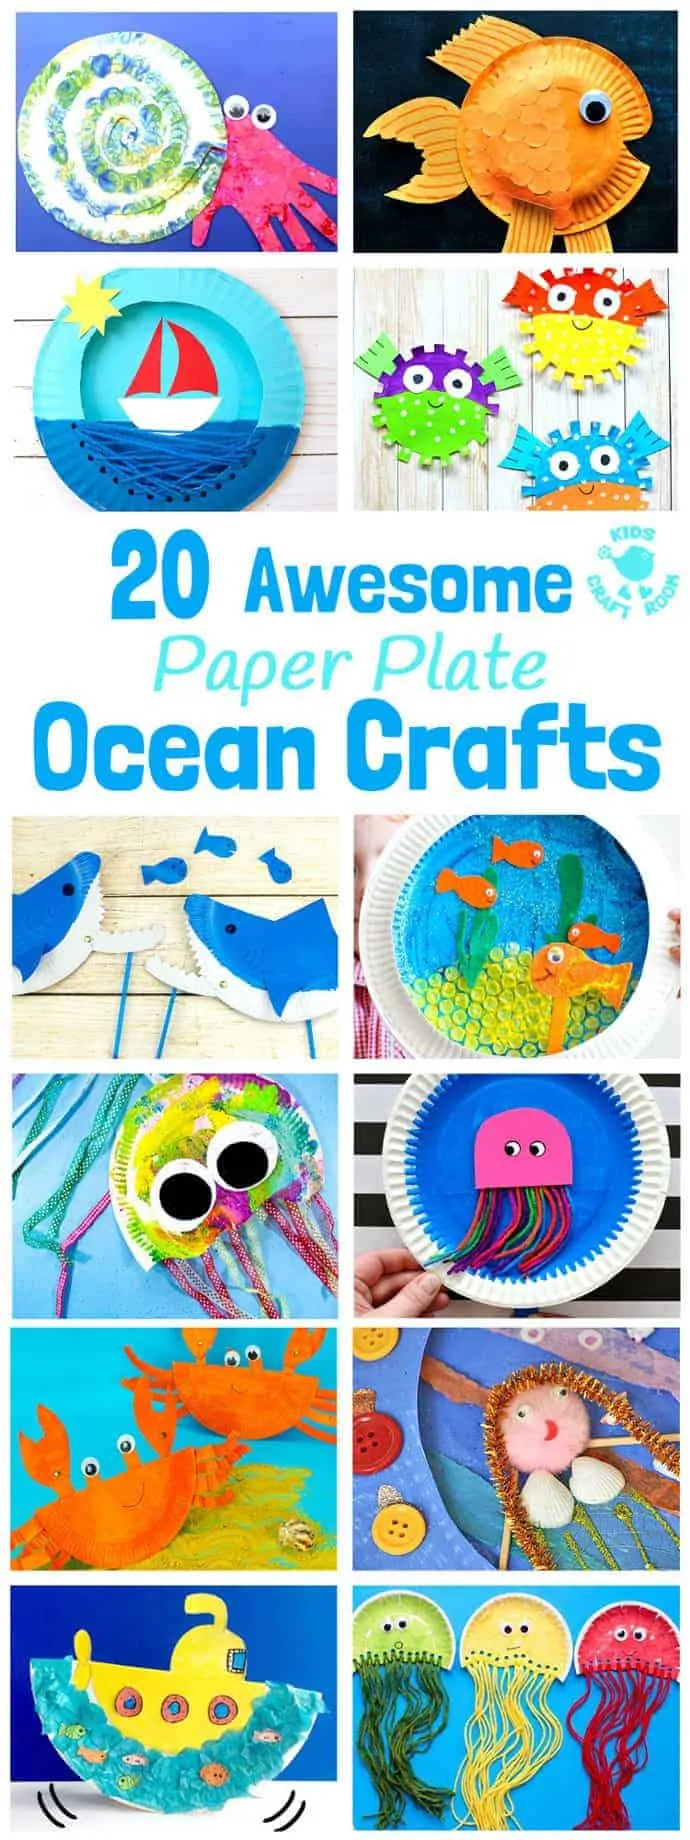 PAPER PLATE OCEAN CRAFTS - 20 awesome sea themed Summer crafts for kids. From swimming jellyfish to chomping sharks and nipping crabs you'll have lots of fun with these beach crafts.